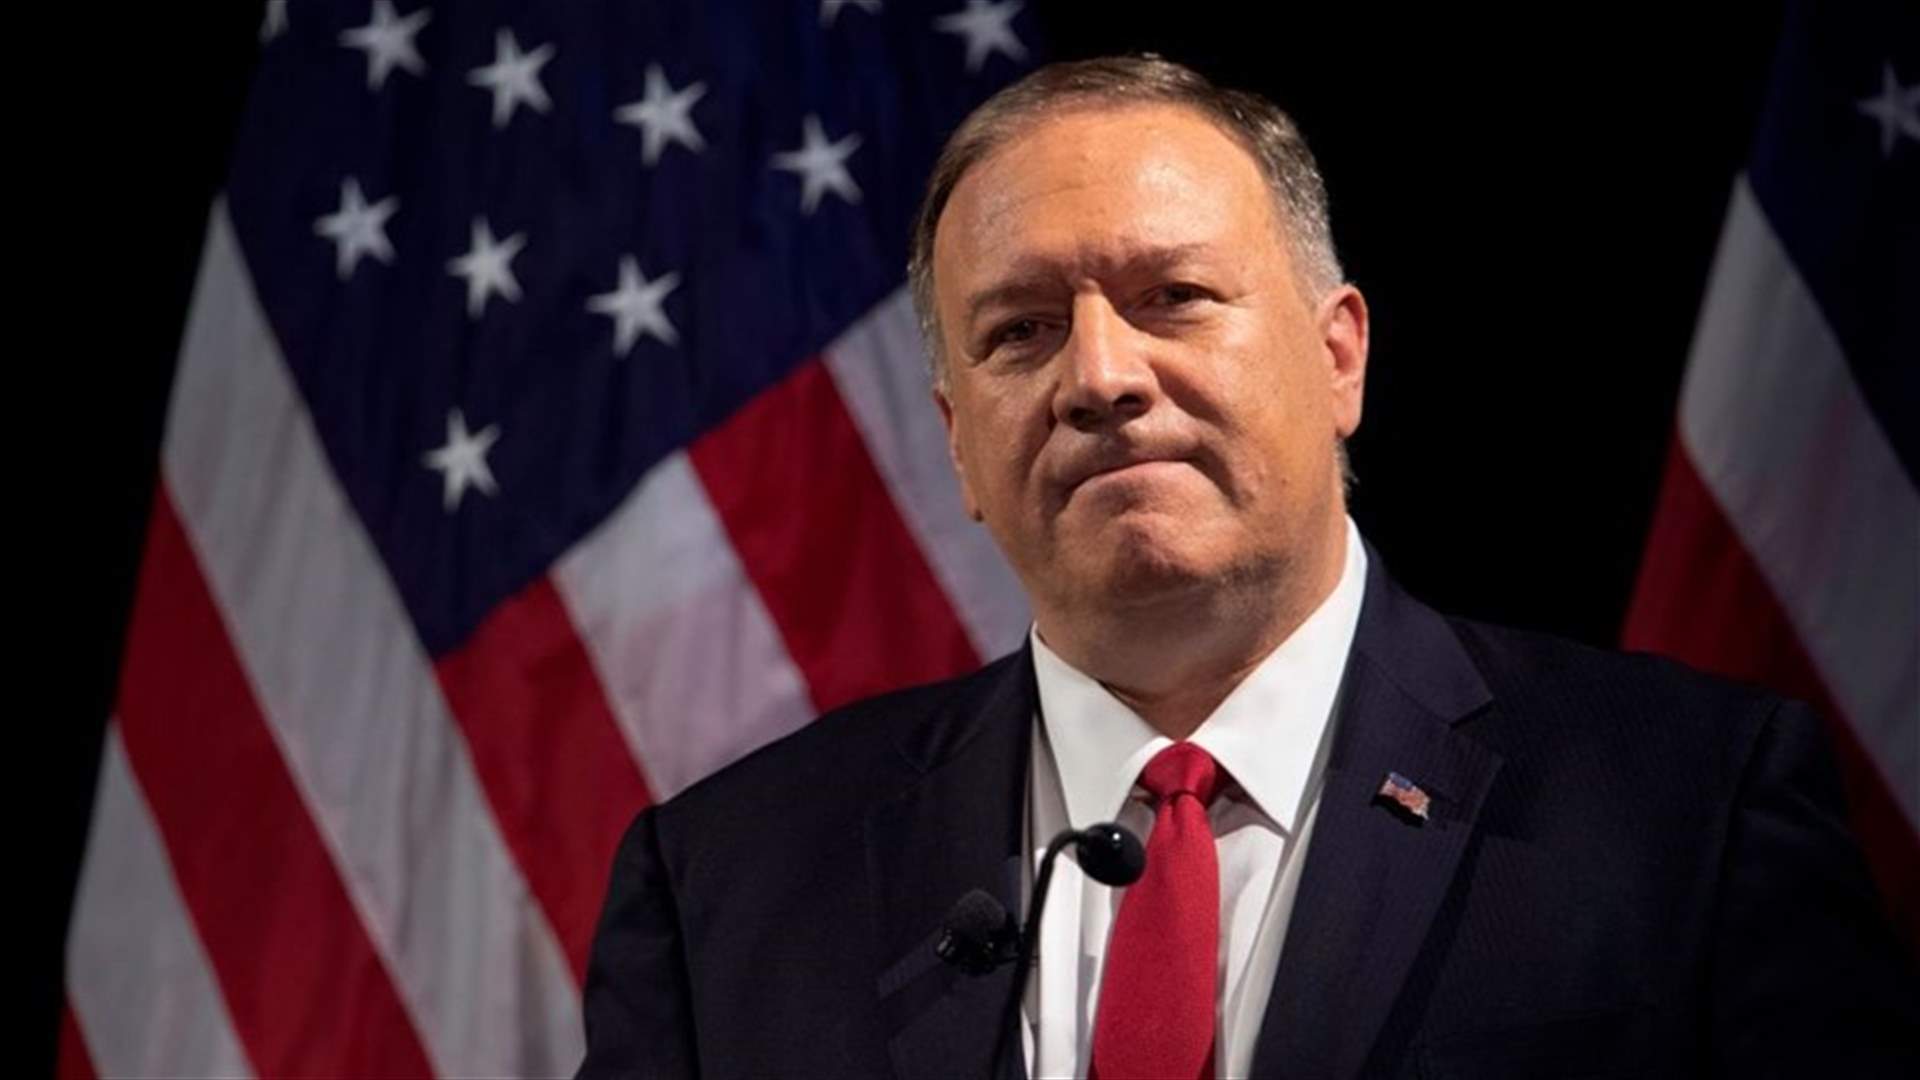 Pompeo: Business as usual is unacceptable